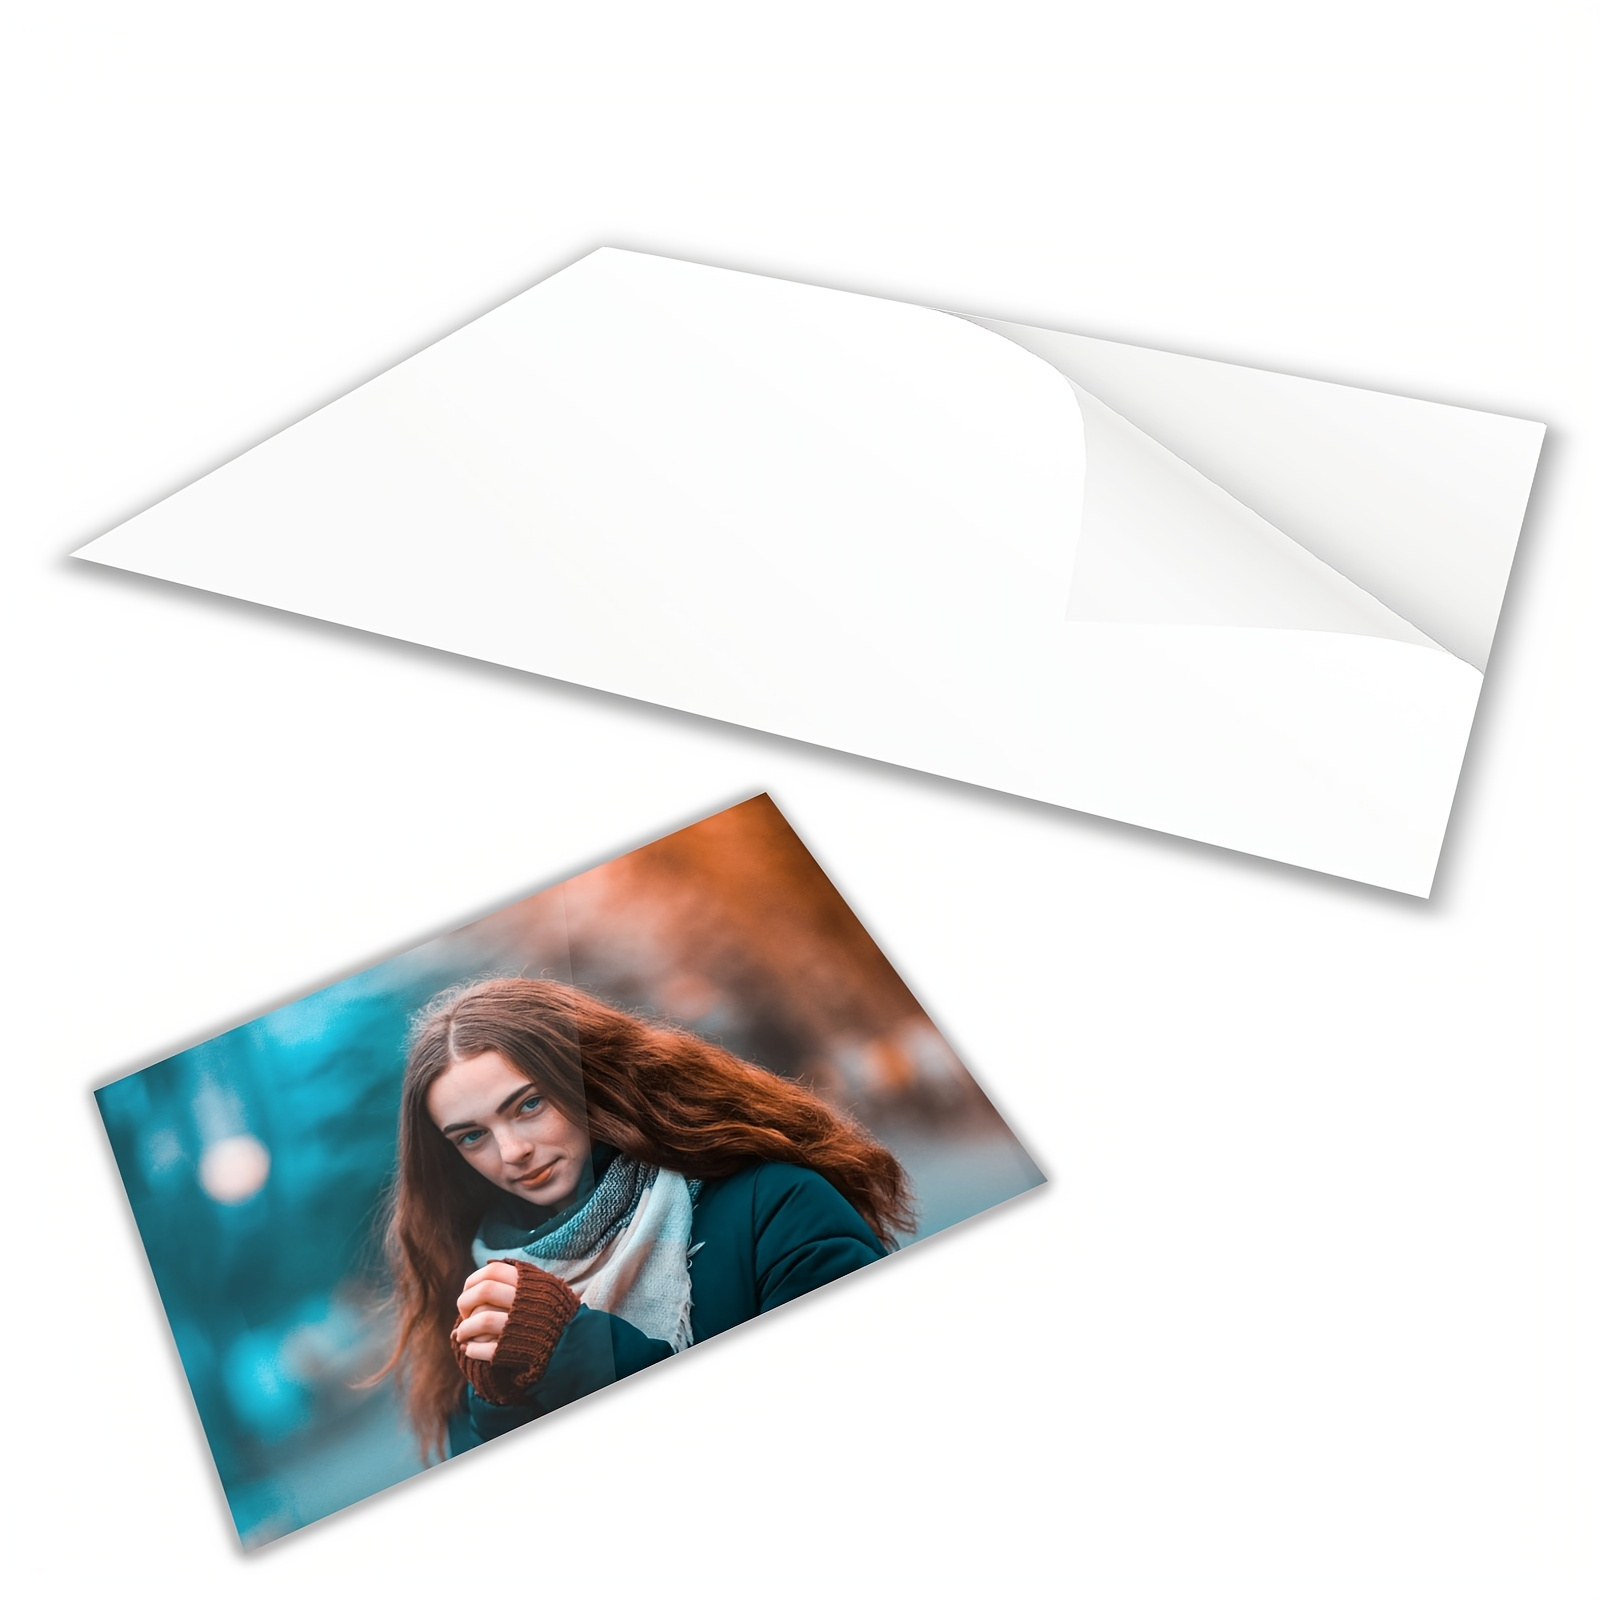 VIOLETTO] 20 Sheets - Self Adhesive Laminating Sheets for Ultimate  Protection. No Machines Needed, 4 Mil Thickness, 8.5 x 11 Inches.  Effortless, Durable & Perfect for Documents & Photos. - Yahoo Shopping